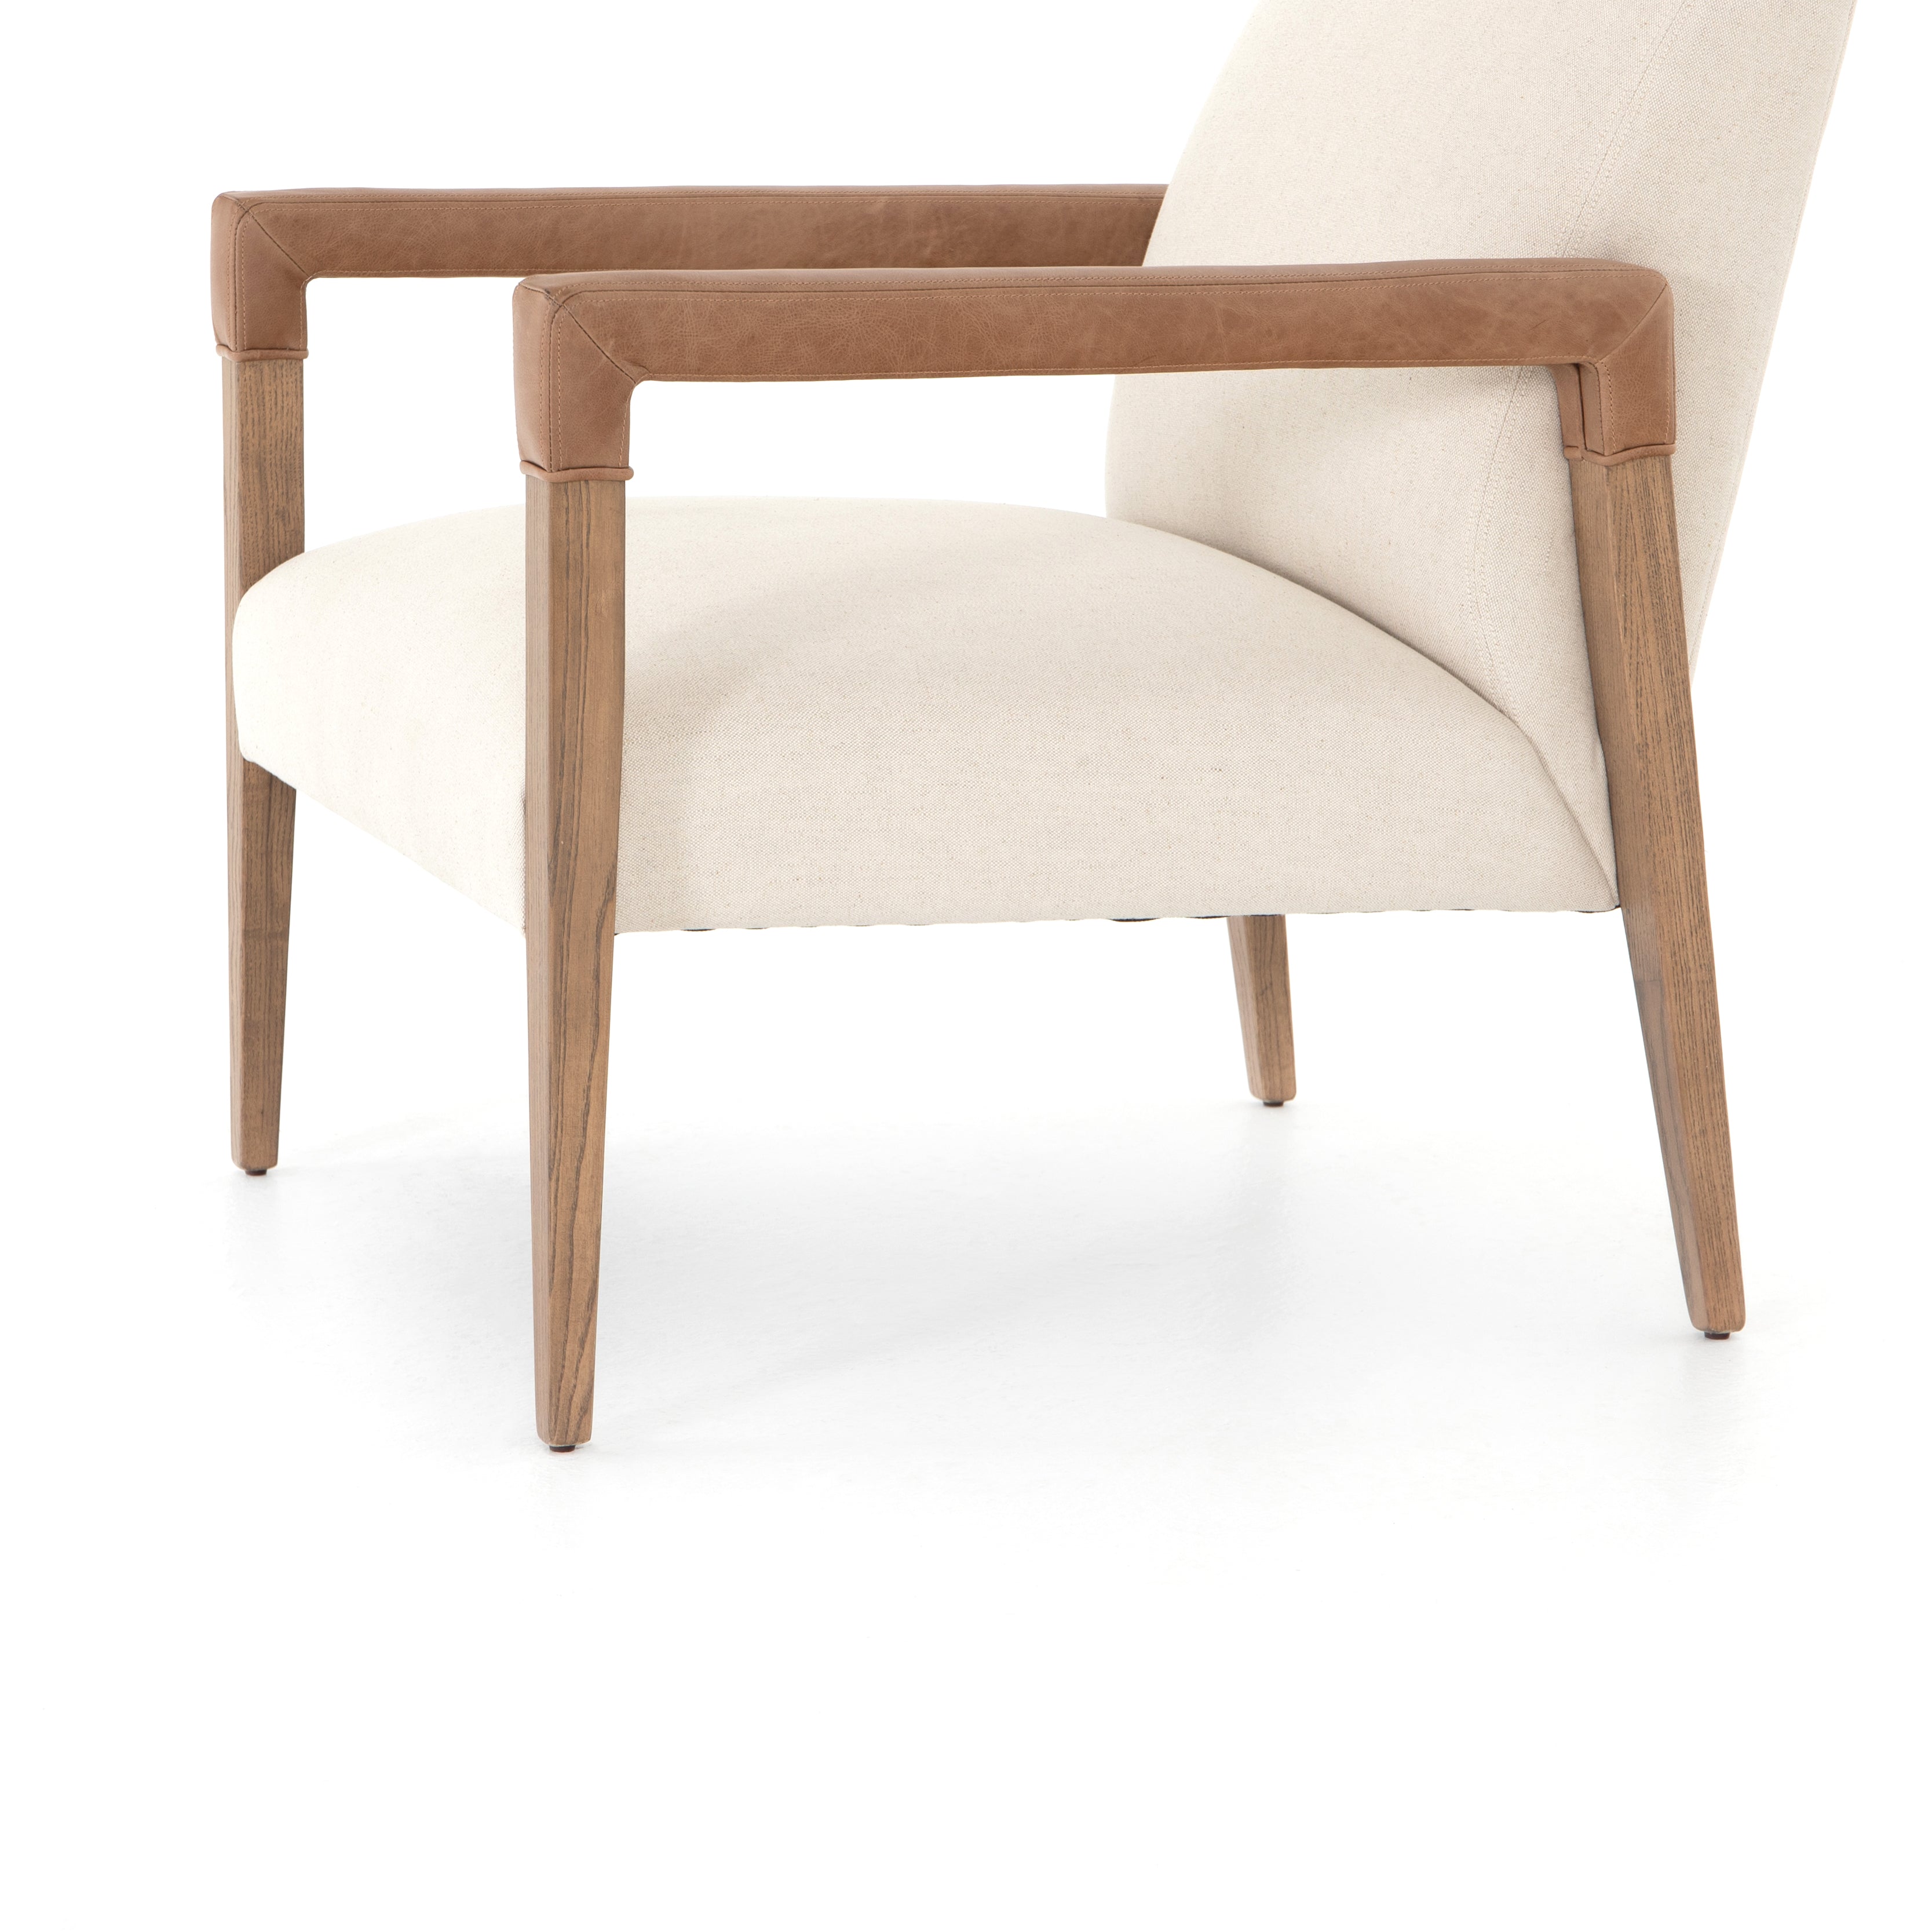 Harbor Natural Fabric &amp; Lamont Nettlewood with Chaps Saddle Leather | Reuben Chair | Valley Ridge Furniture